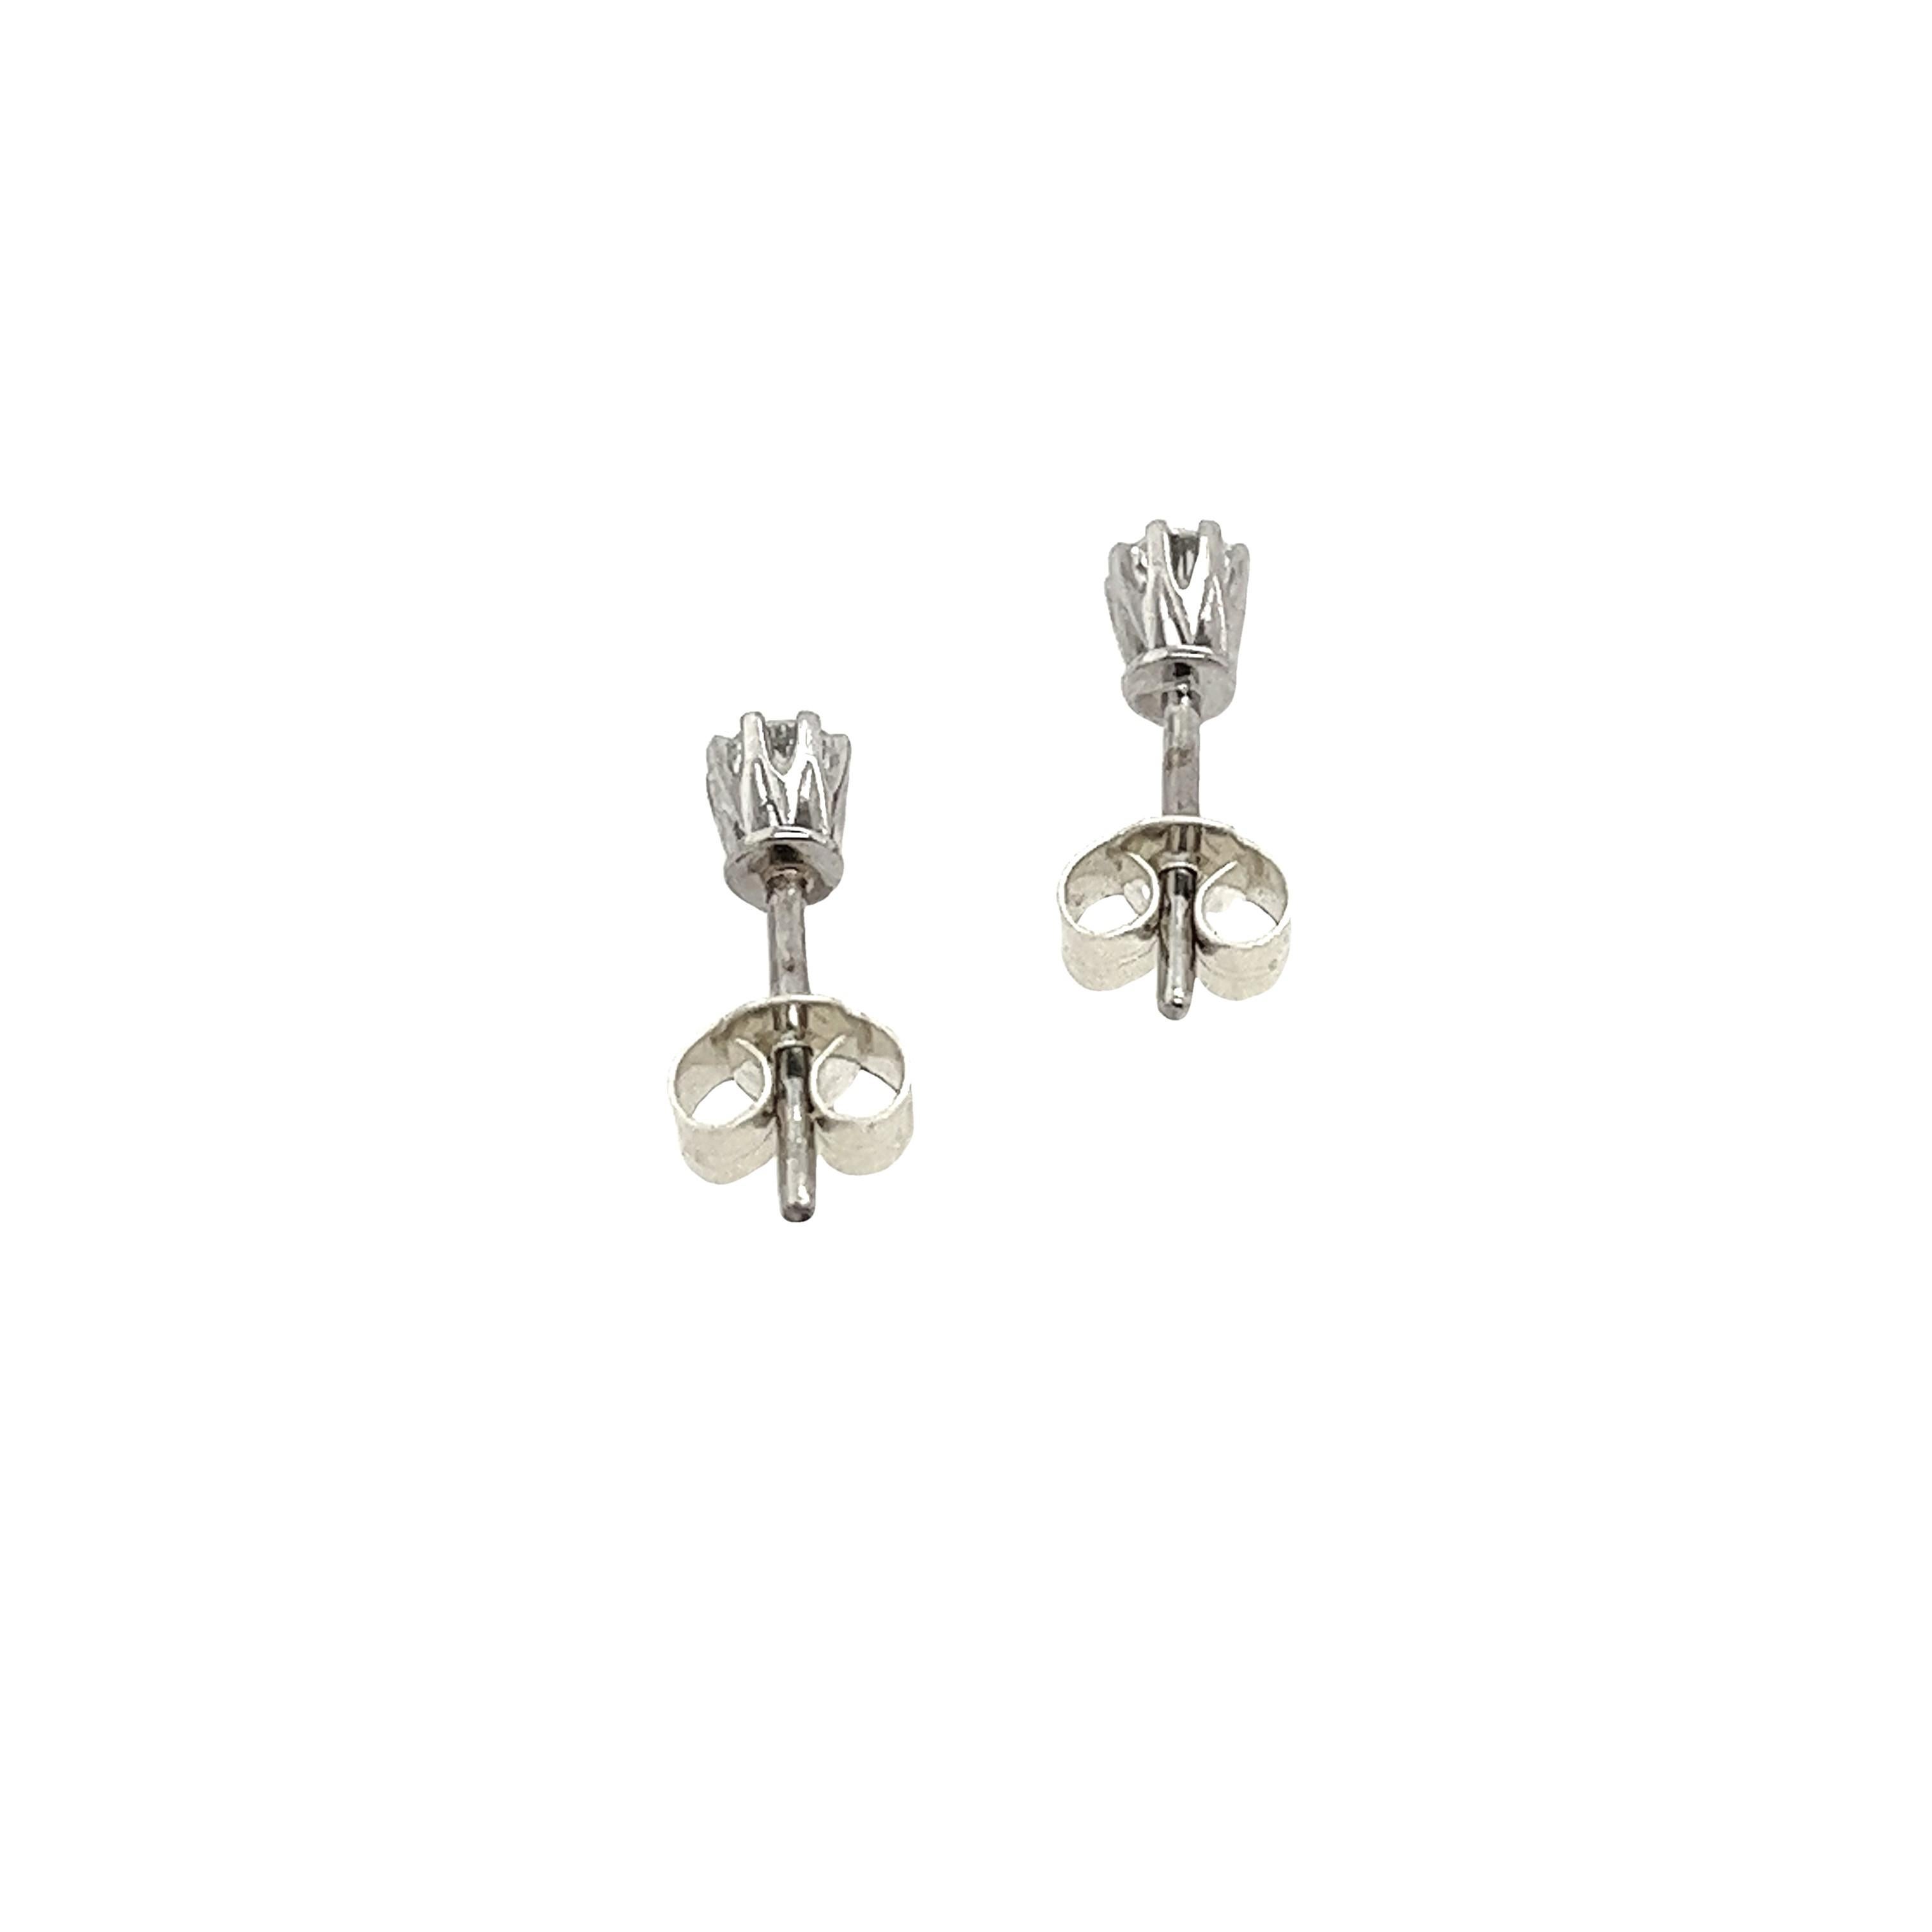 These stunning diamond earrings are the perfect pair to add to your collection. They are set in 9ct white gold. The pair is set with 2 round brilliant cut diamonds, with a total diamond weight of 0.20ct.

Total Diamond Weight: 0.20ct 
Diamond